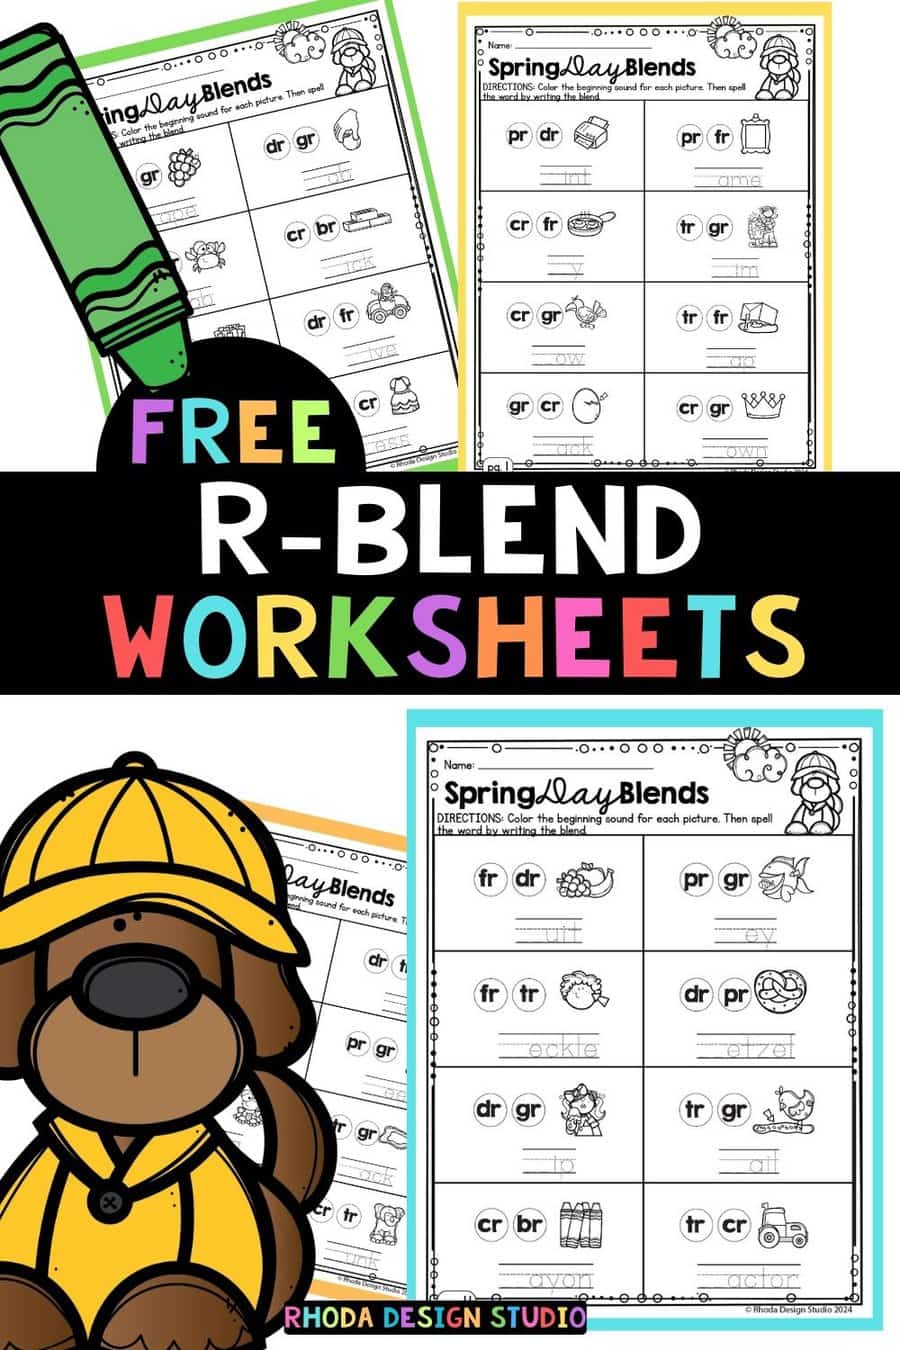 Phonics worksheets : R-Consonant blends fluency bundle - Kindergarten/First Grade. This bundle helps student to build reading fluency with R-Blend words and sight words.